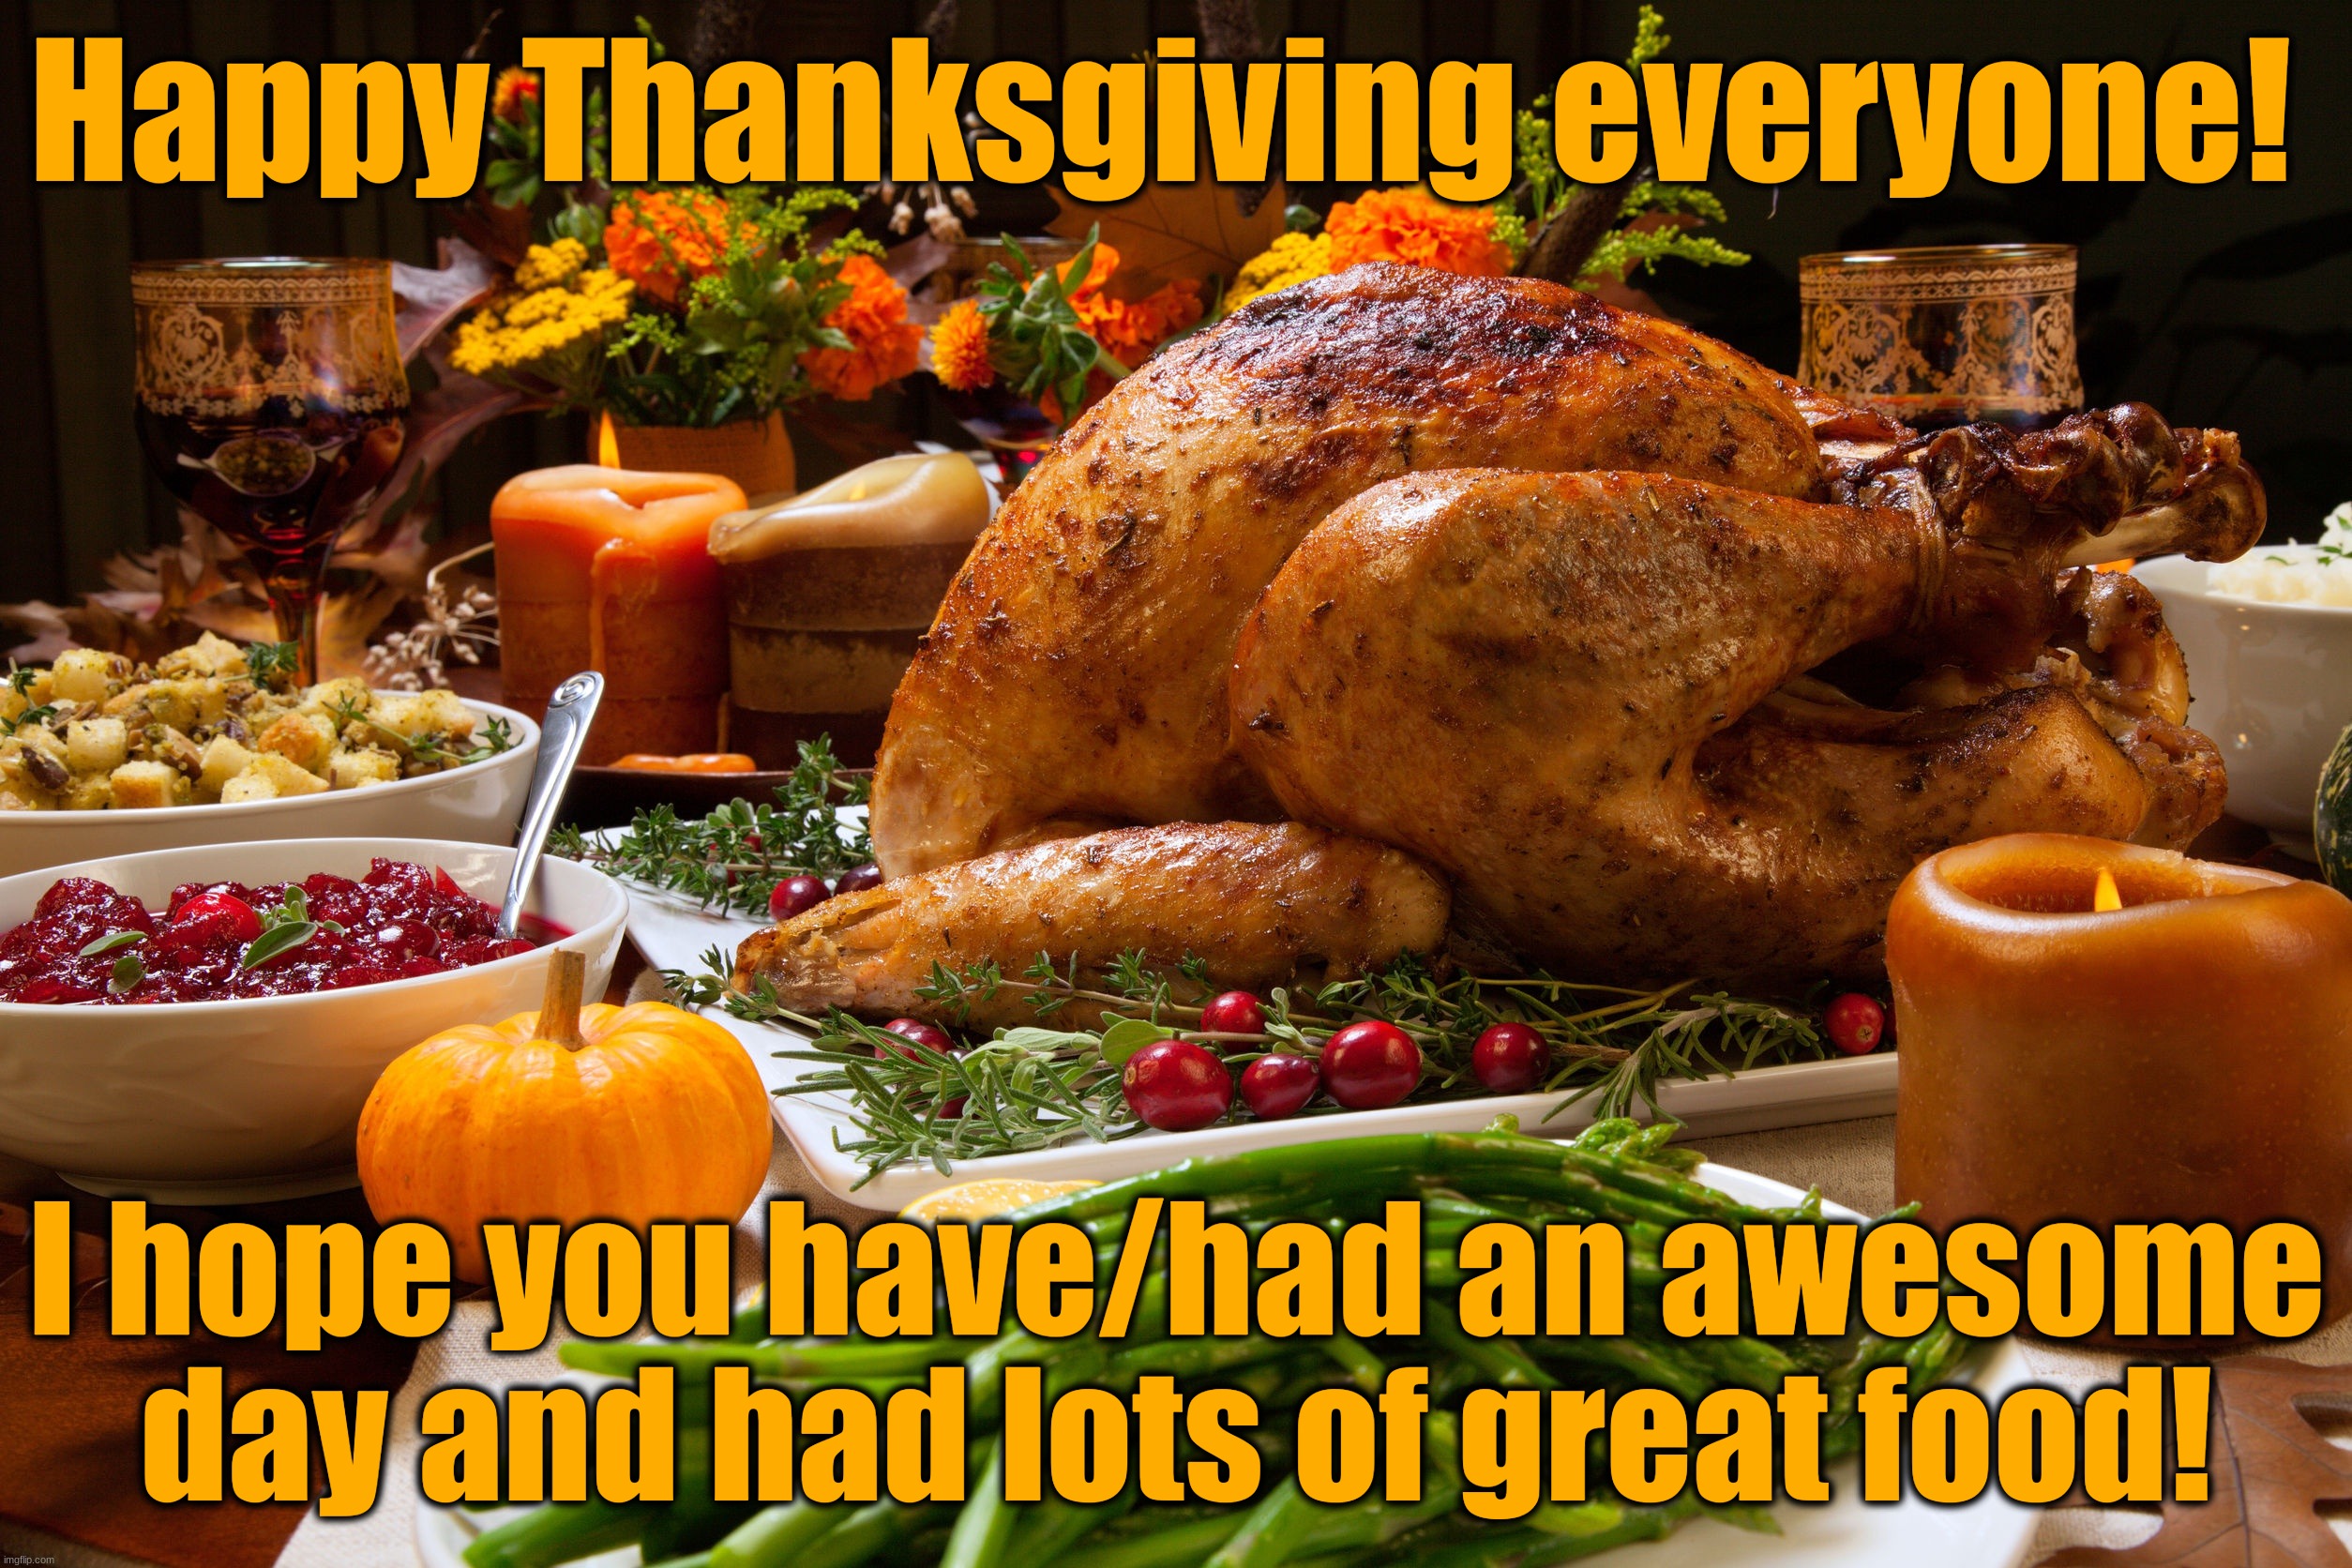 Have a great Thanksgiving everyone! - Imgflip